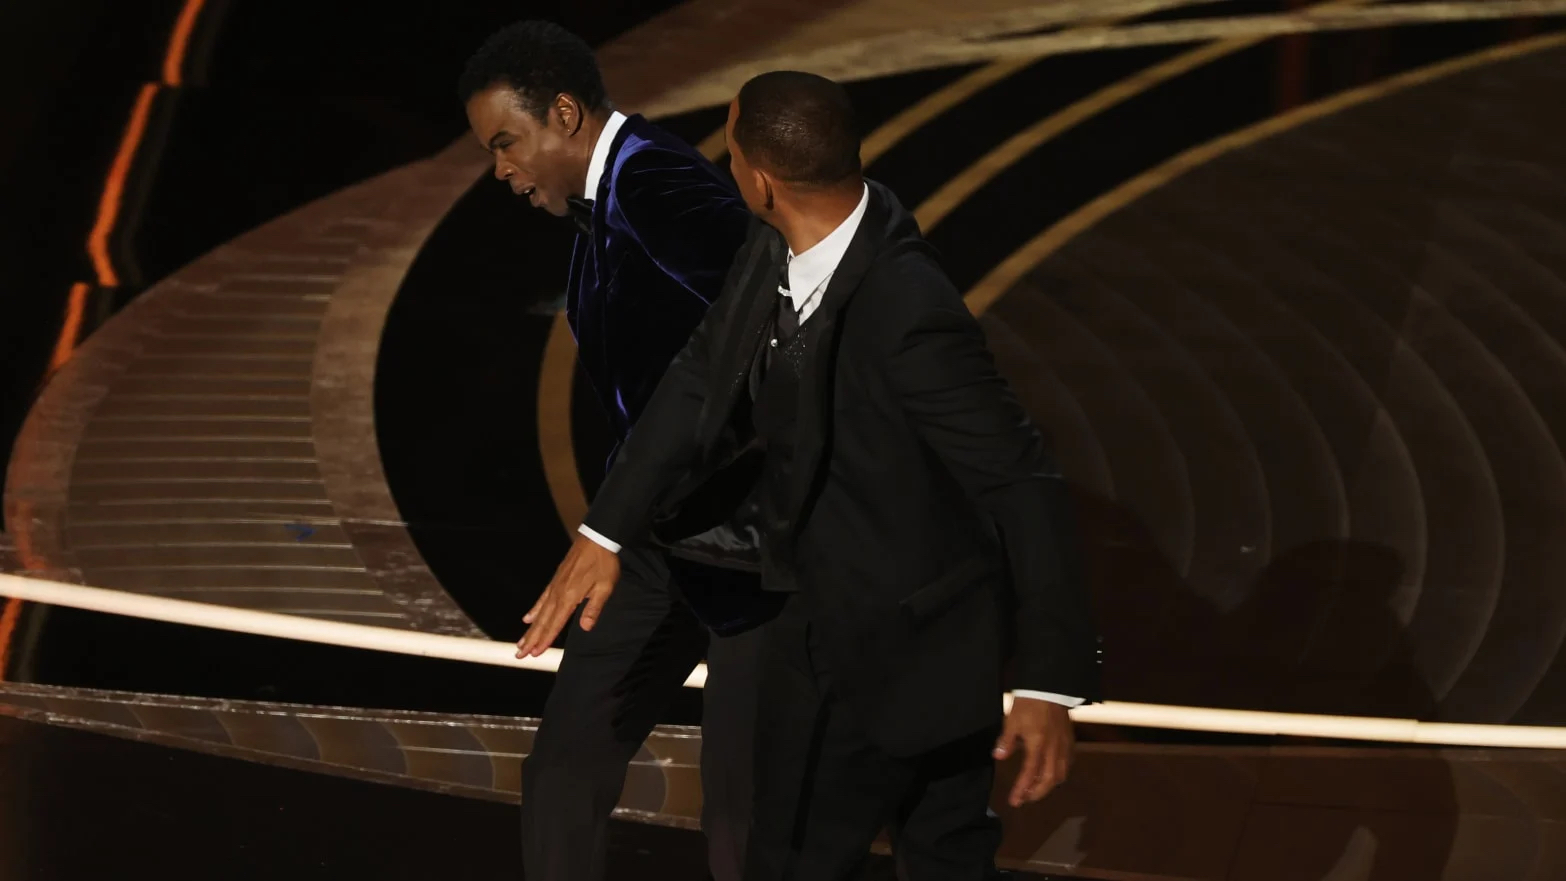 USAfrica: Actor Will Smith apologizes for smacking Chris Rock for joking about his wife’s bald head at the Oscars